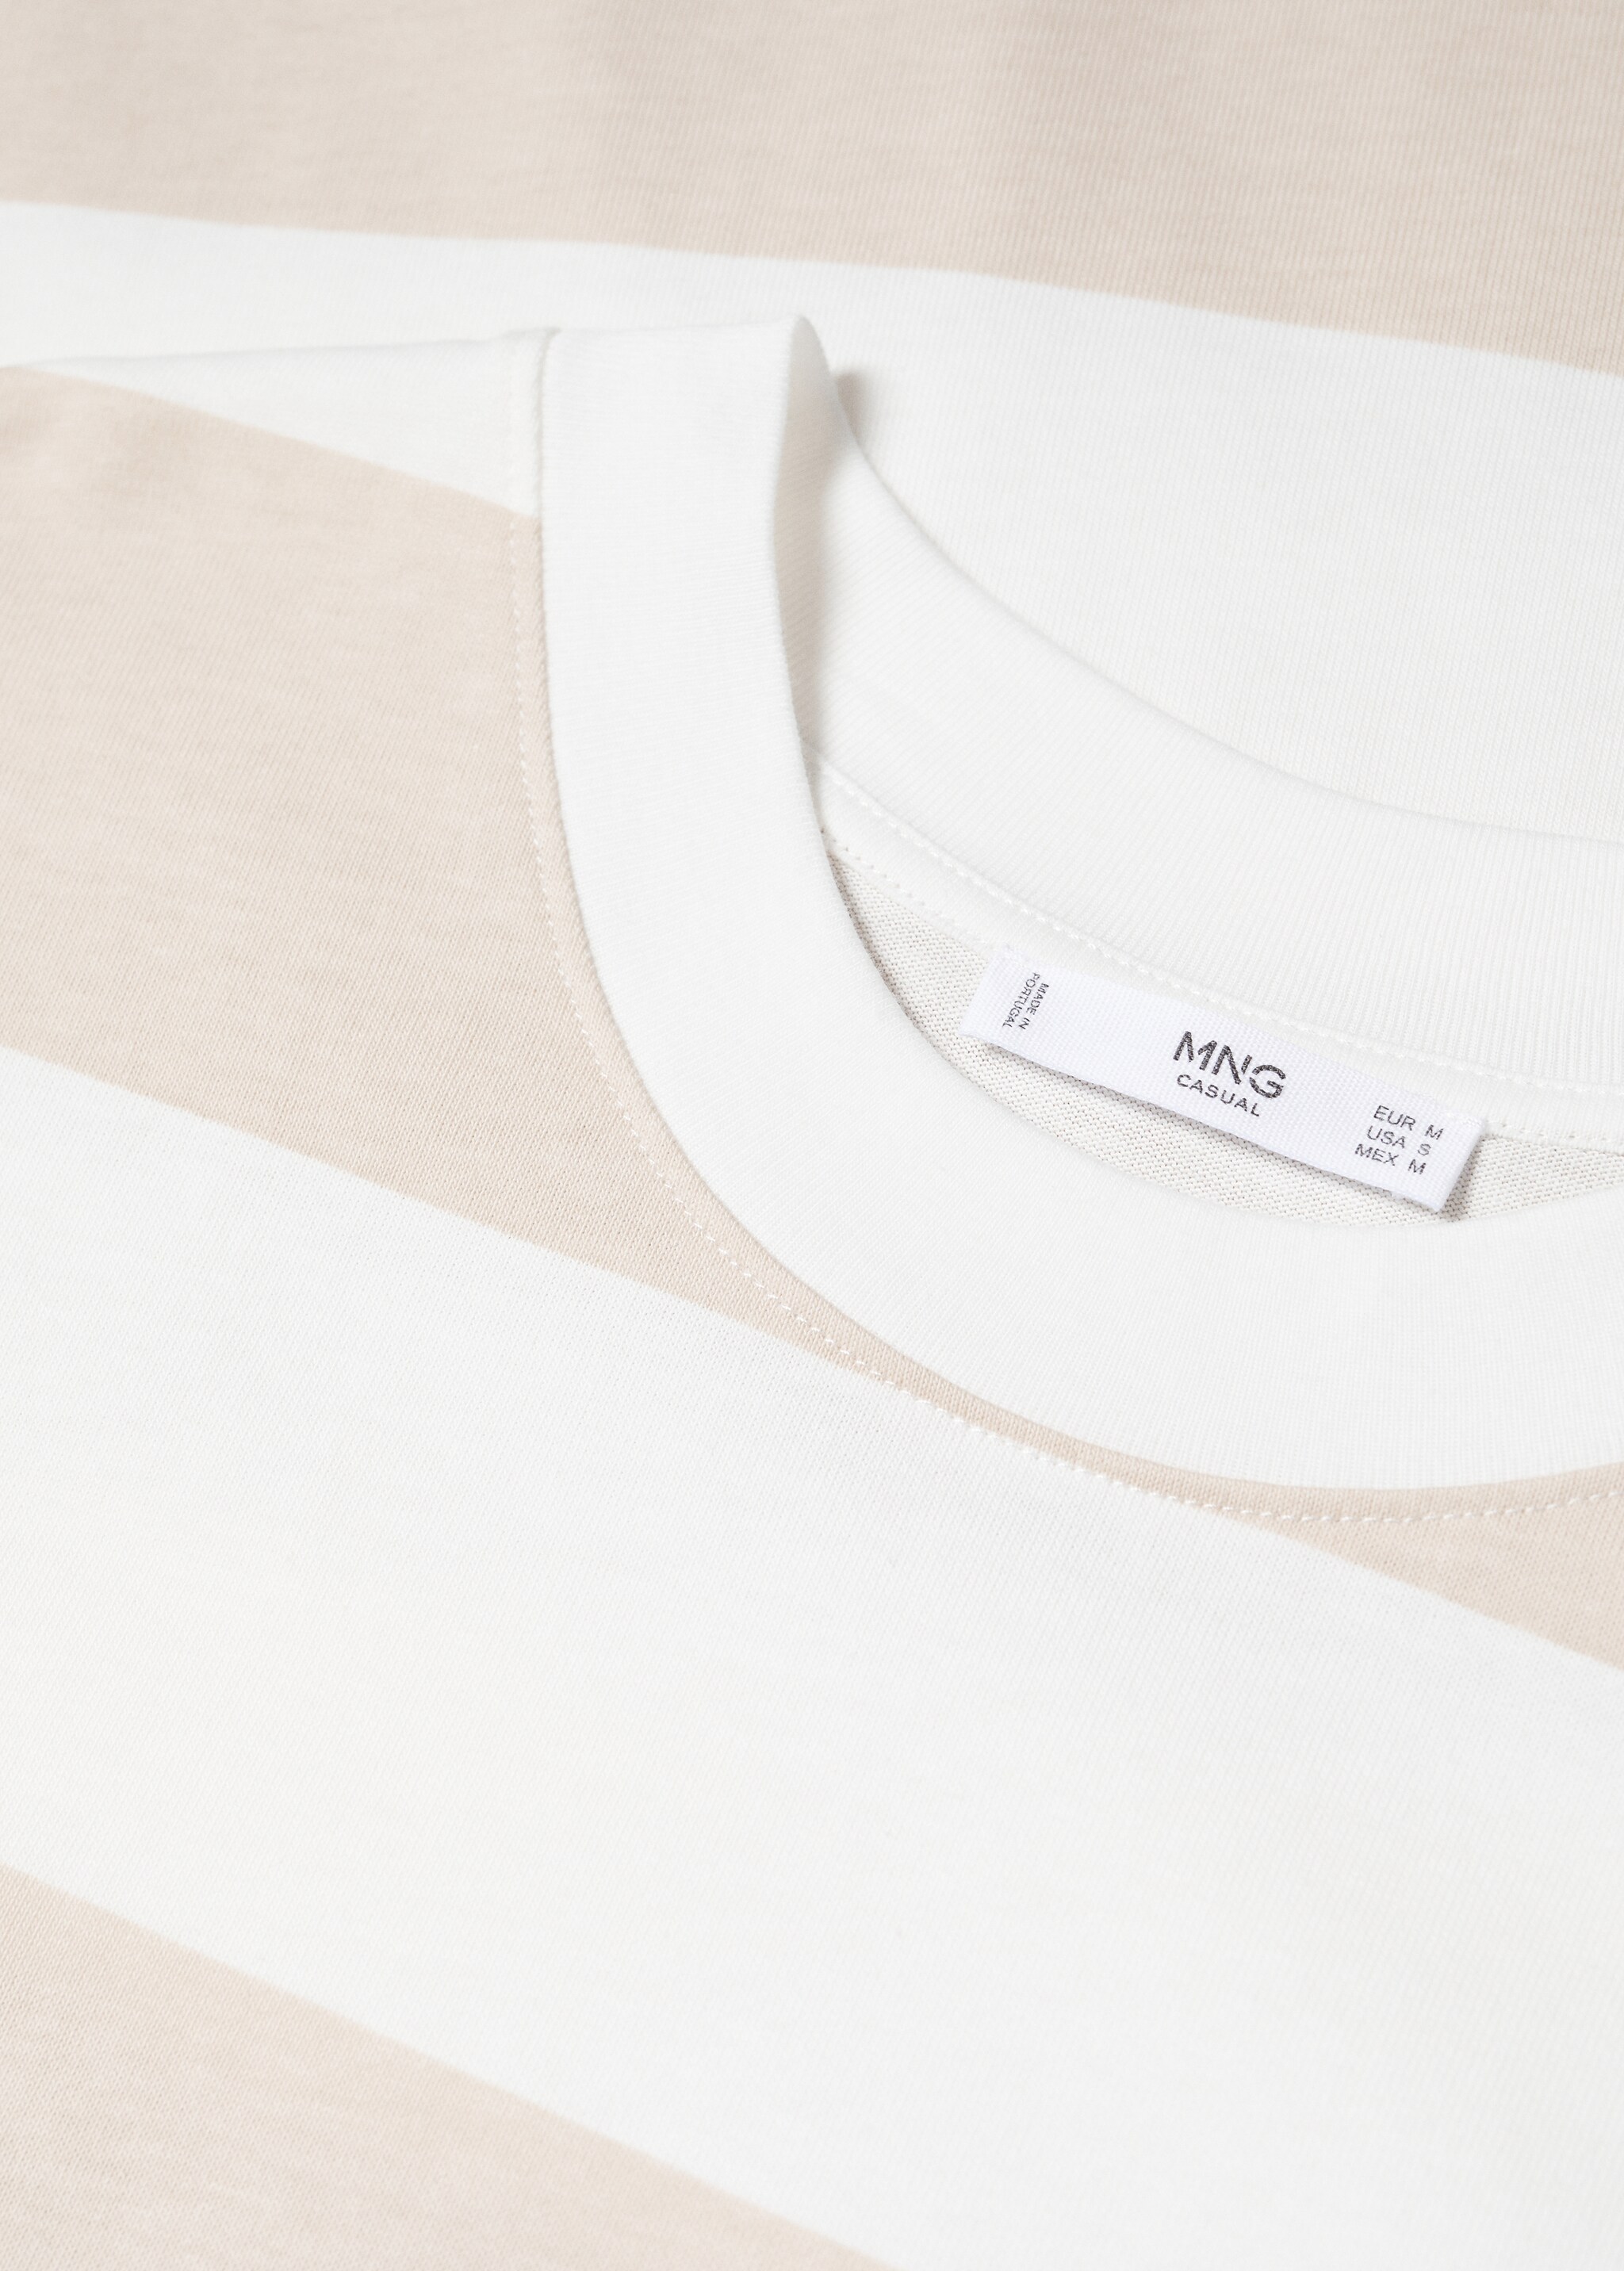  Striped cotton camisole - Details of the article 8